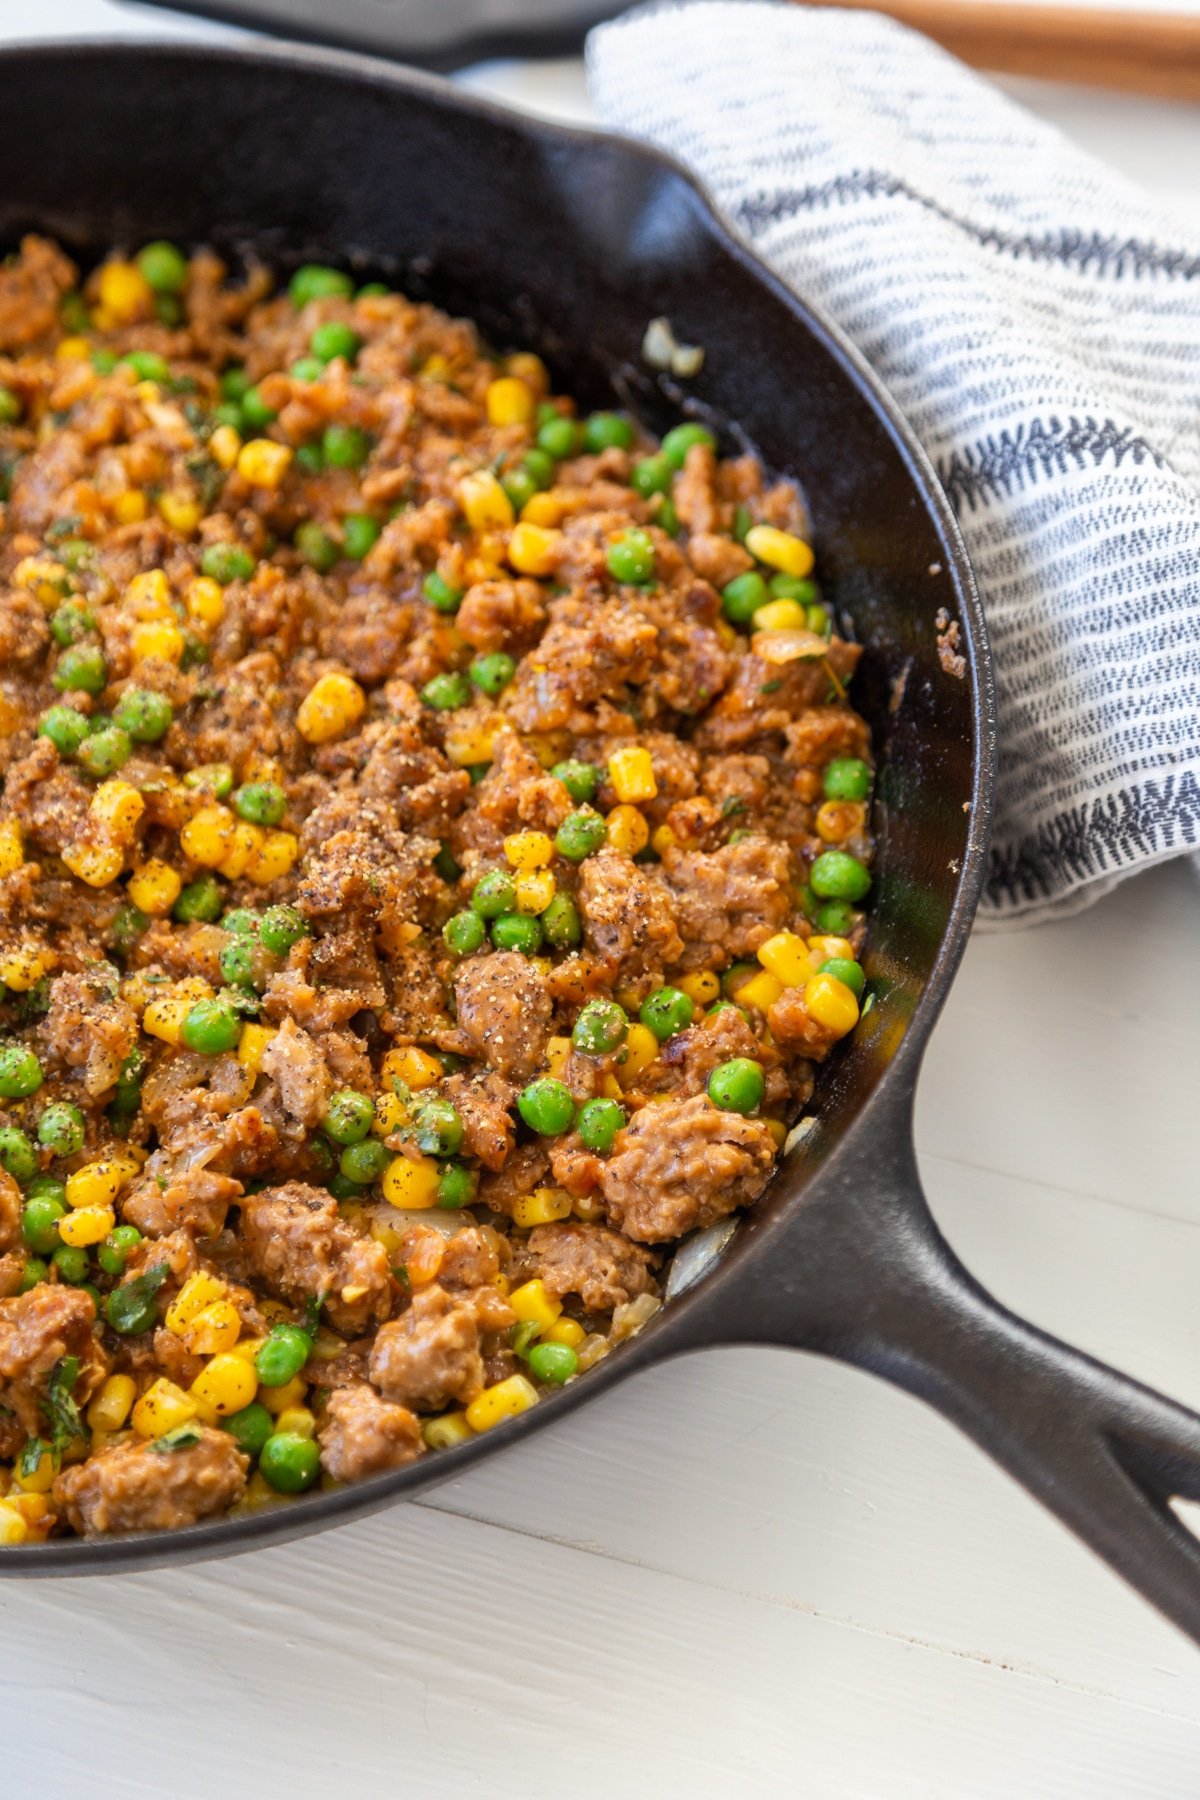 An iron skillet filled with ground meat, peas, and corn.